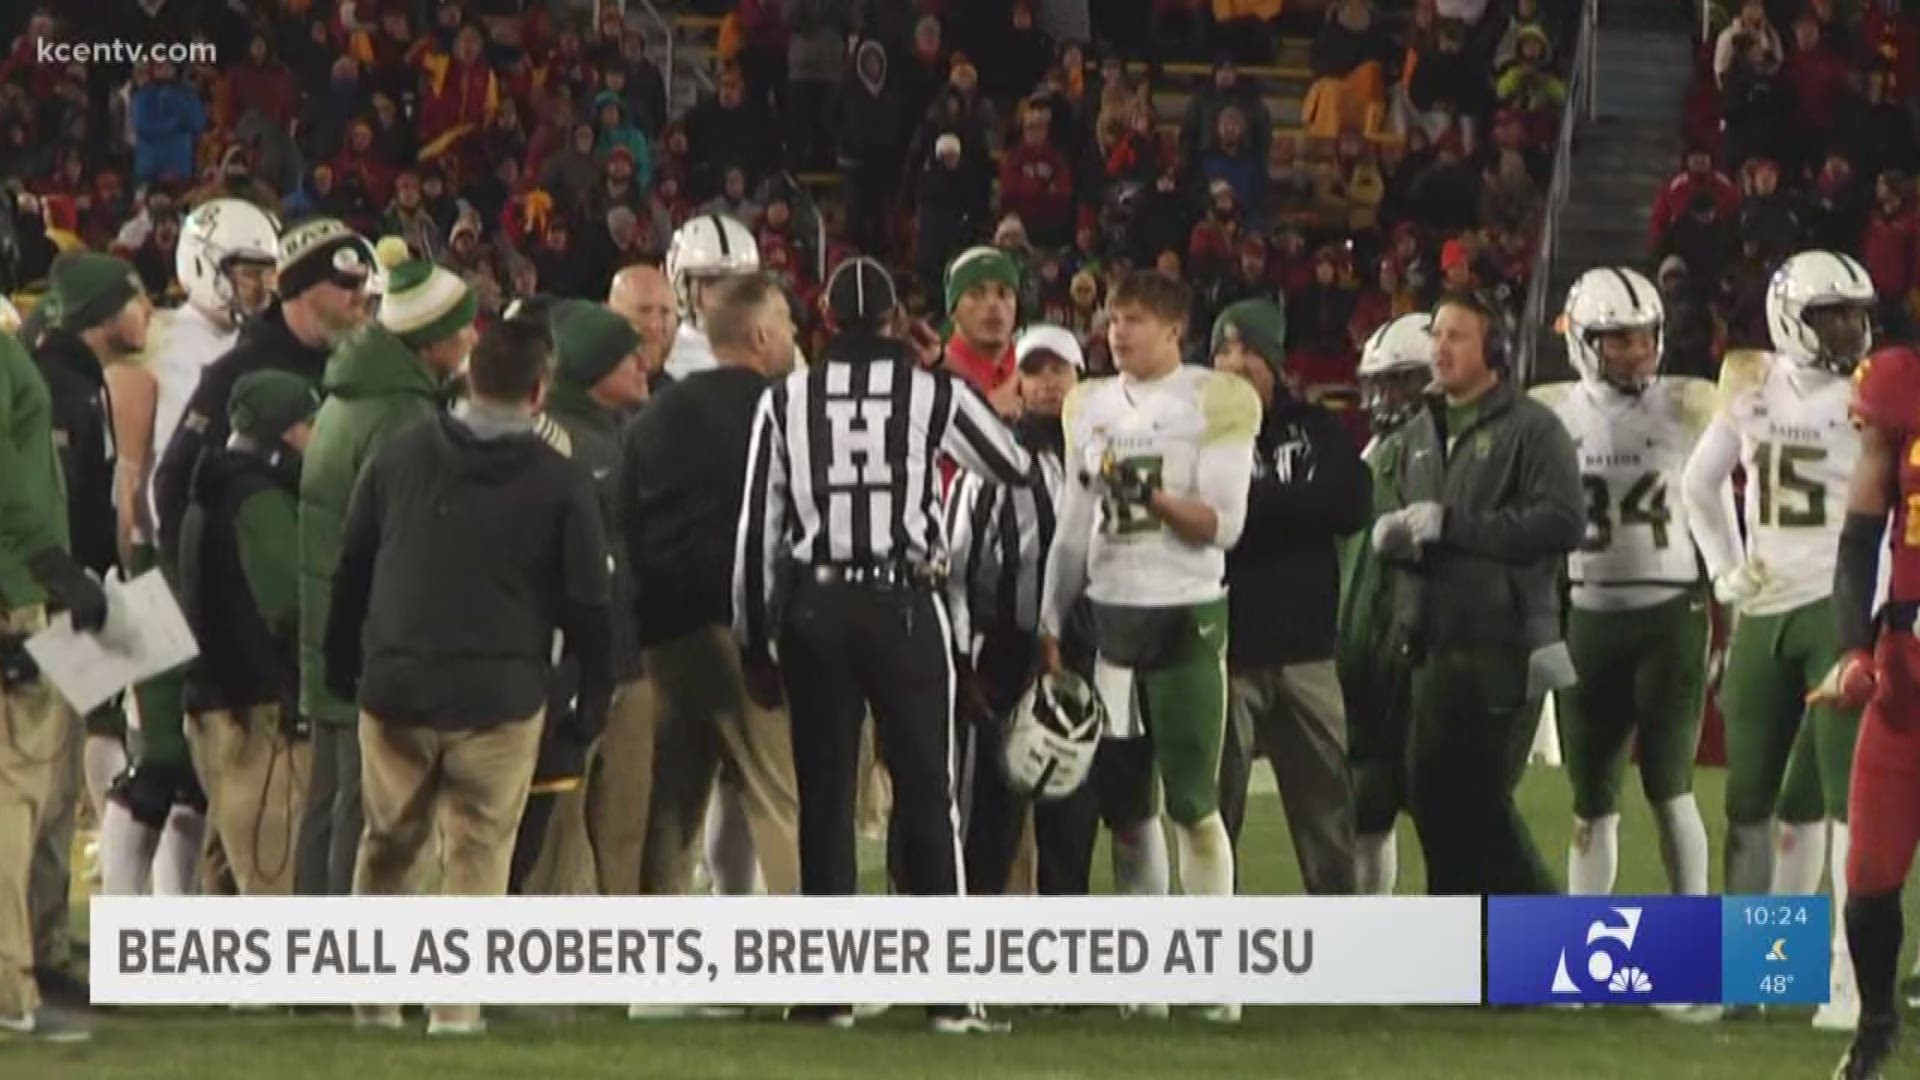 Matt Rhule said it best after the game: He doesn't think he's ever seen anything quite like Brewer's ejection.